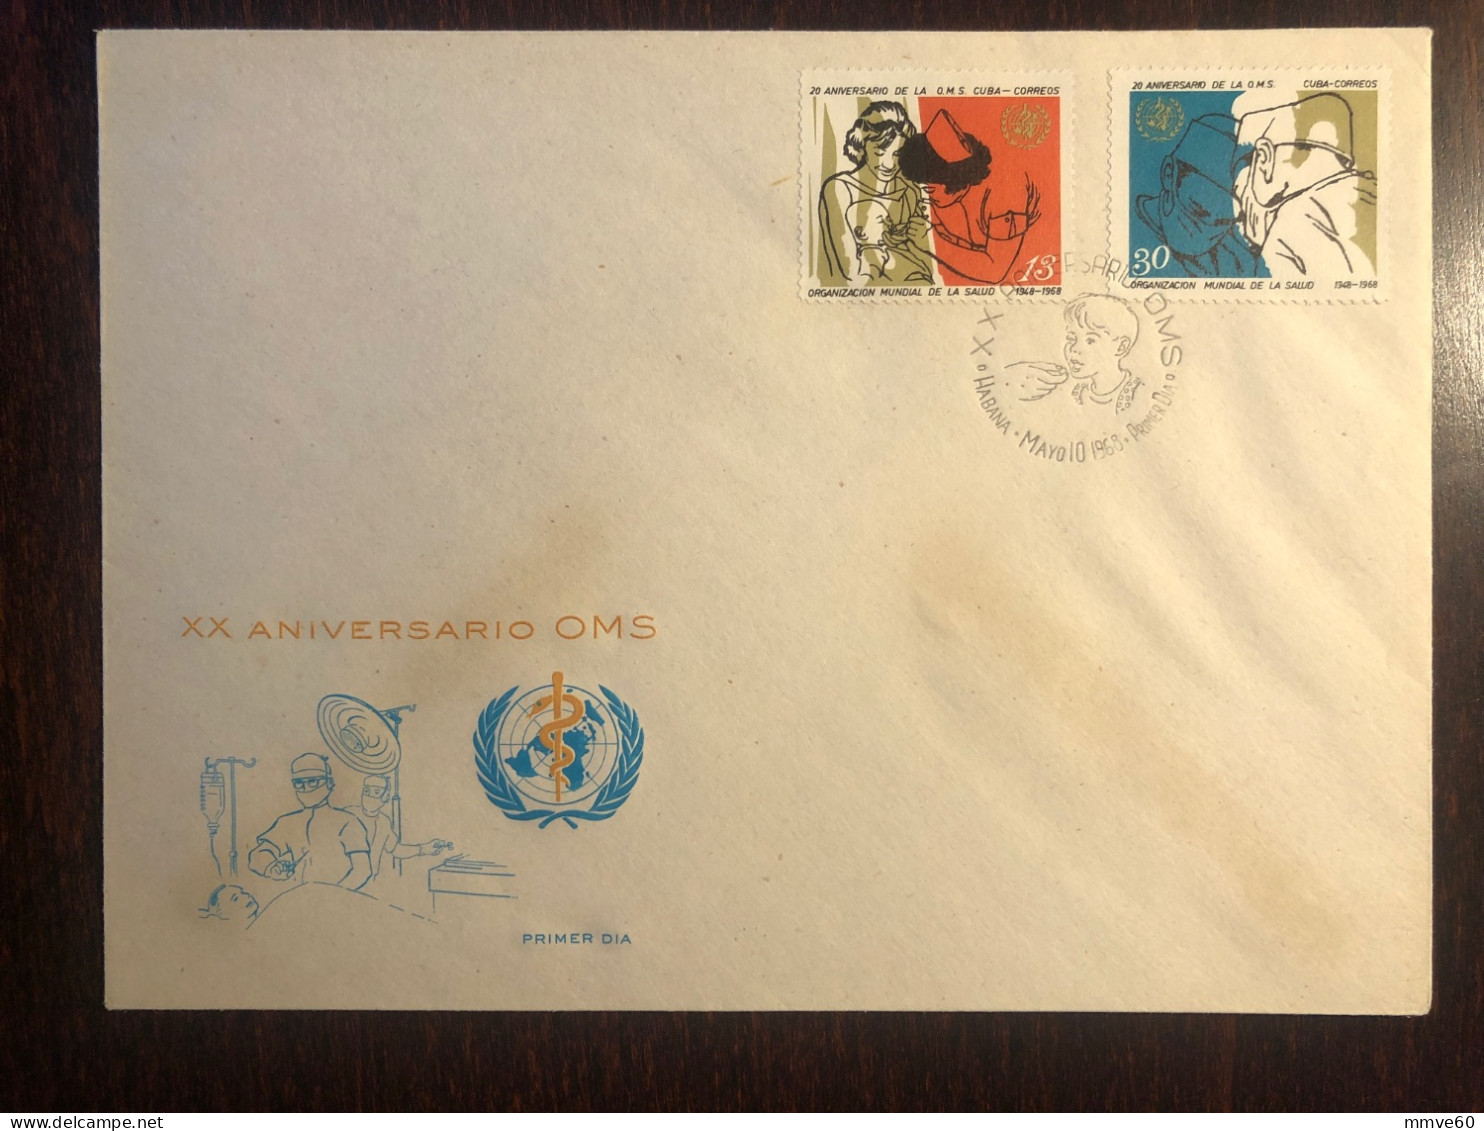 CUBA FDC COVER 1968 YEAR WHO SURGERY HEALTH MEDICINE STAMP - Covers & Documents